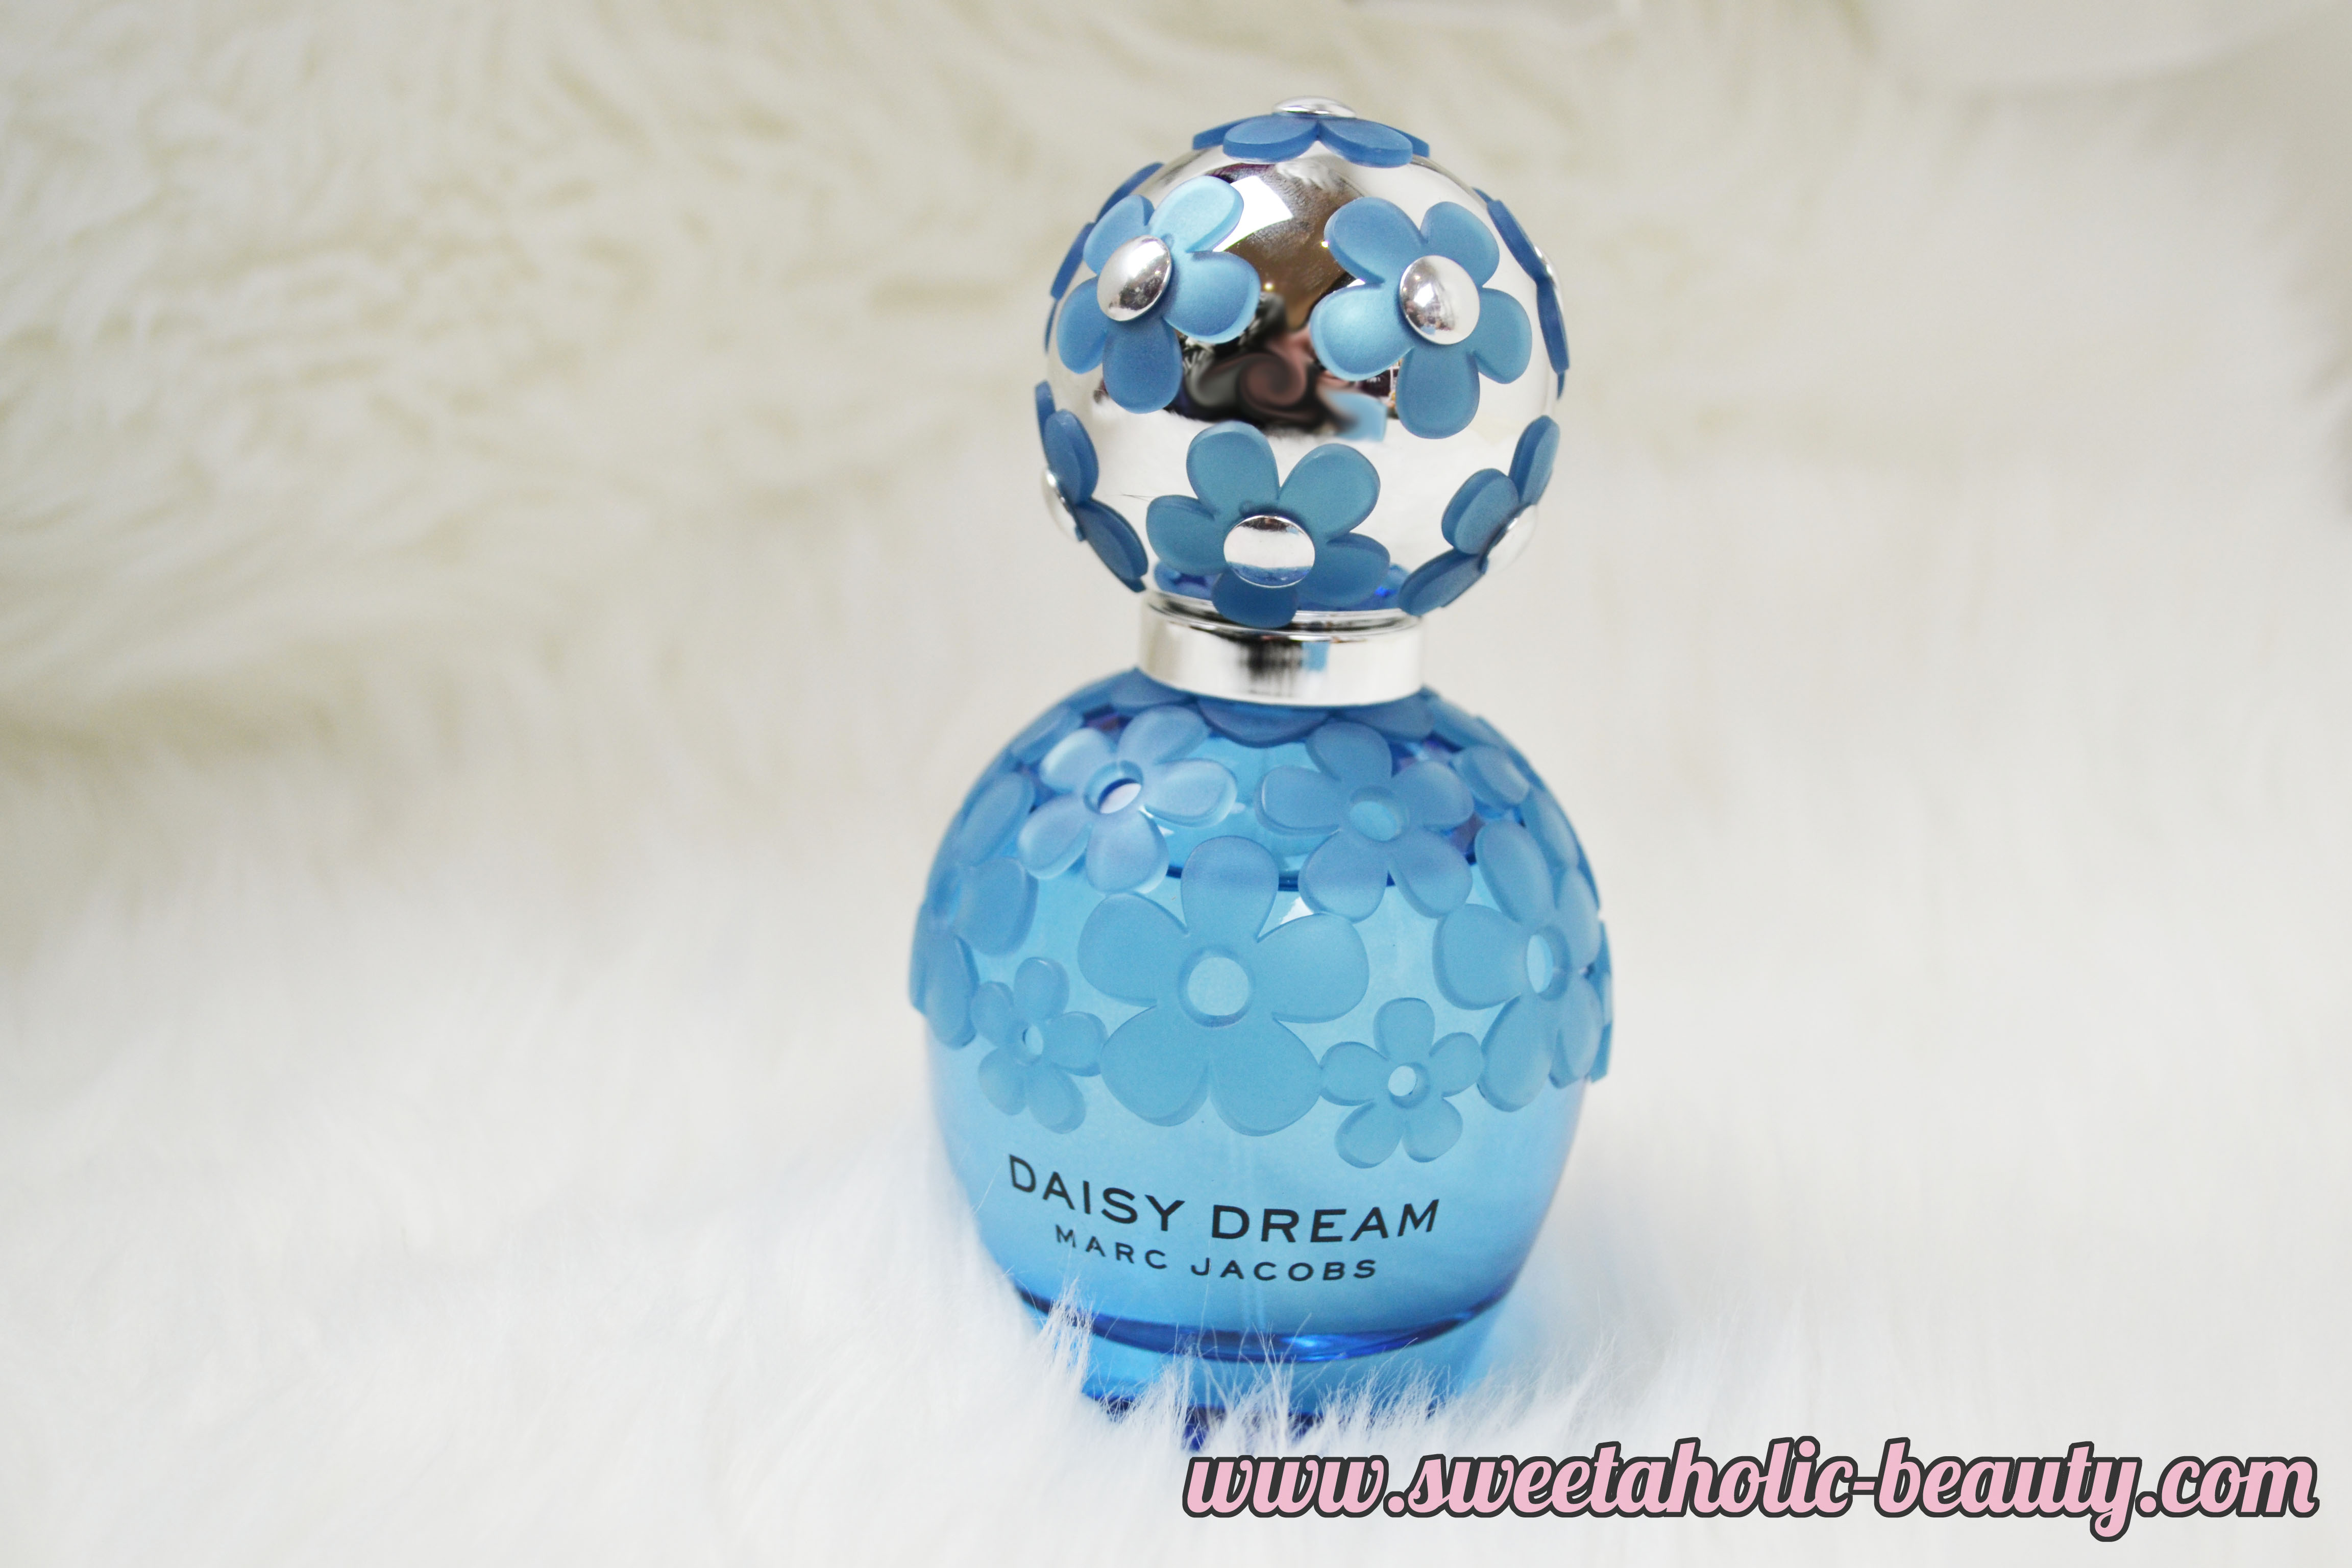 Marc Jacobs Daisy Dream Forever - Review